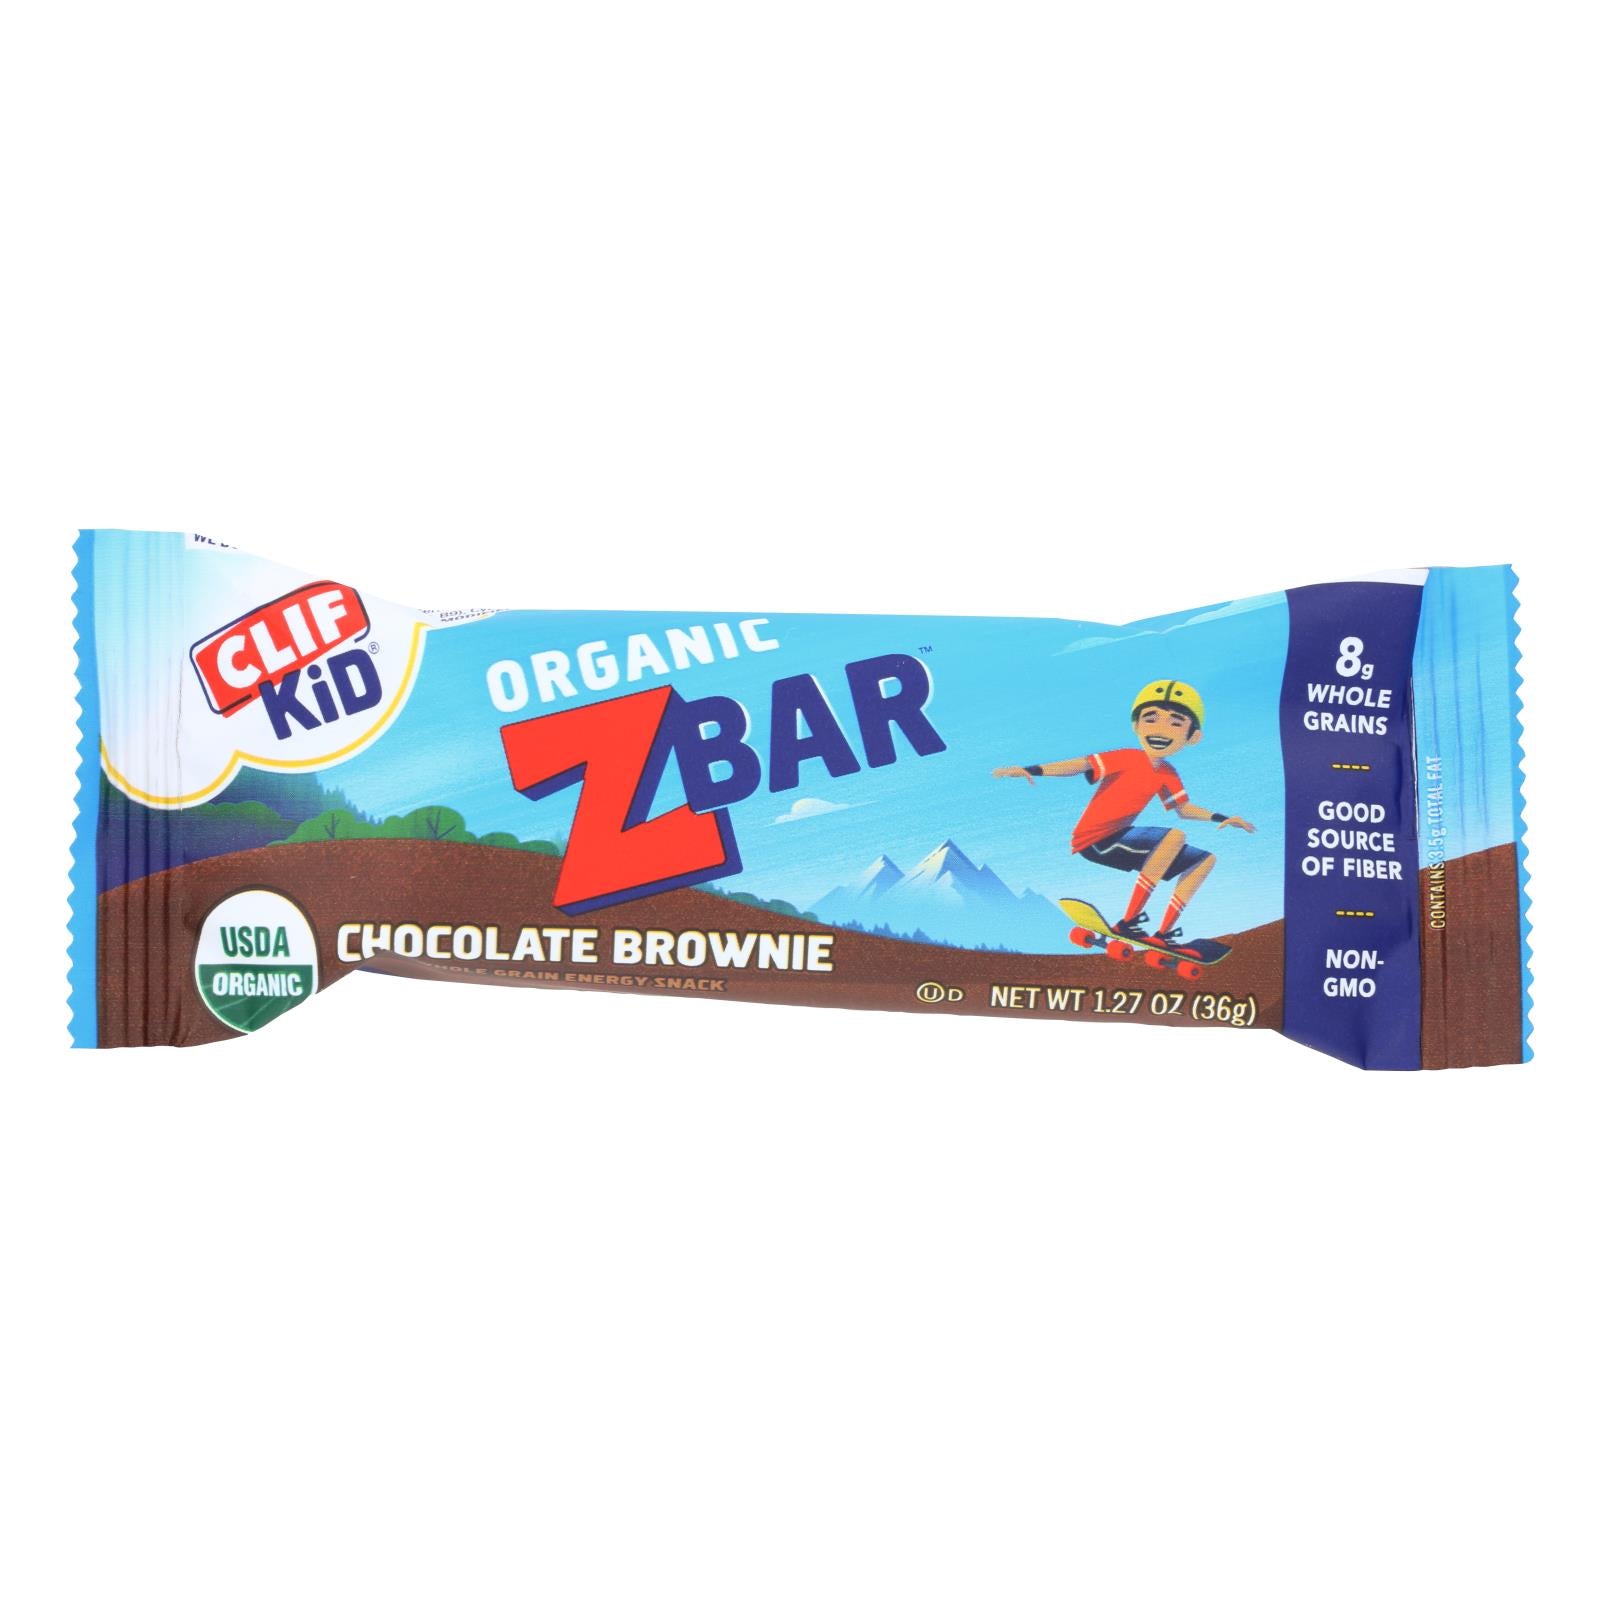 Clif Bar Zbar - Organic Chocolate Brownie - Case Of 18 - 1.27 Oz - Whole Green Foods